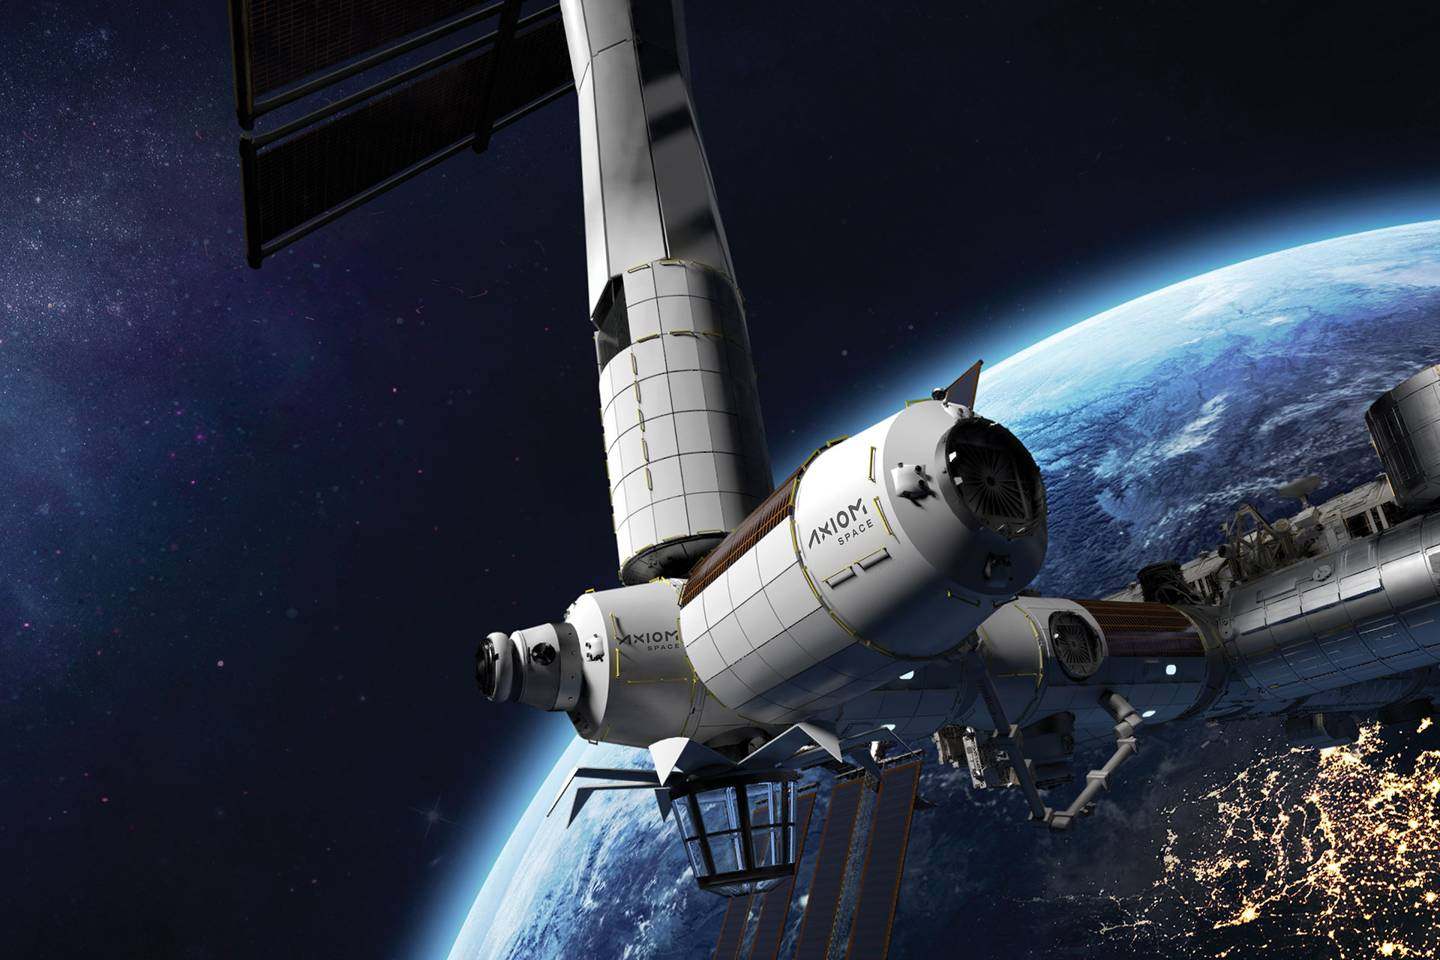 A render of AxStation, the first private space station being designed and built by Axiom Space. It is one of several space tourism projects in development.  Photo: Axiom Space